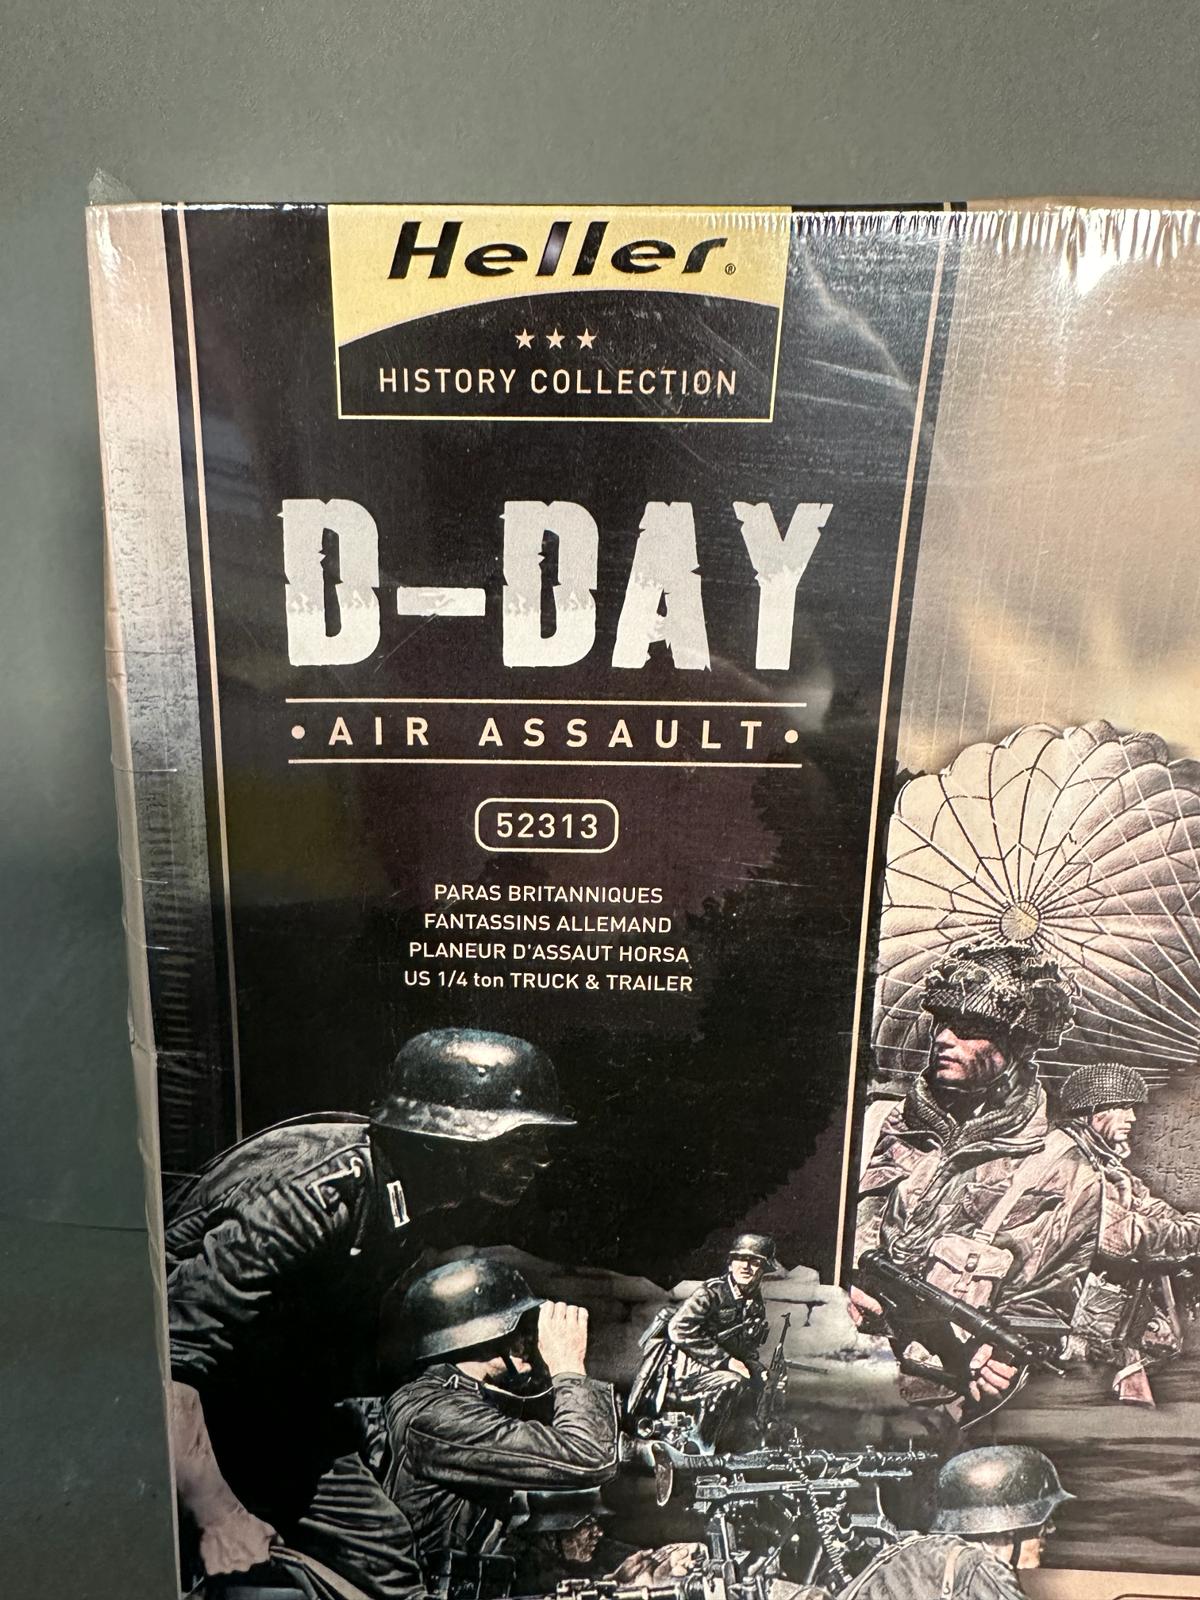 A Heller history collection D-Day Air Assault model kit - Image 4 of 5